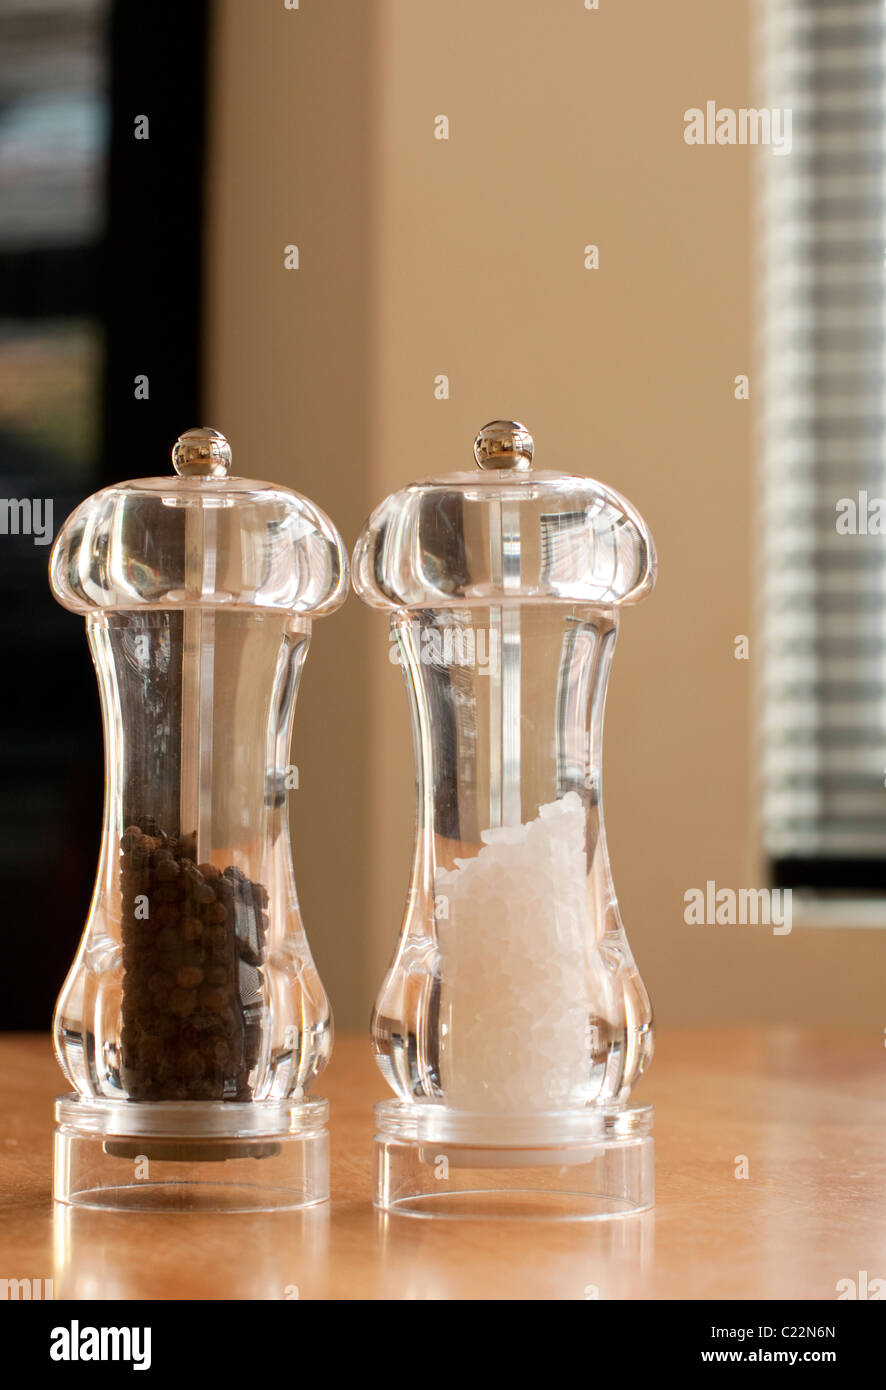 Salt and pepper pots on kitchen table Stock Photo